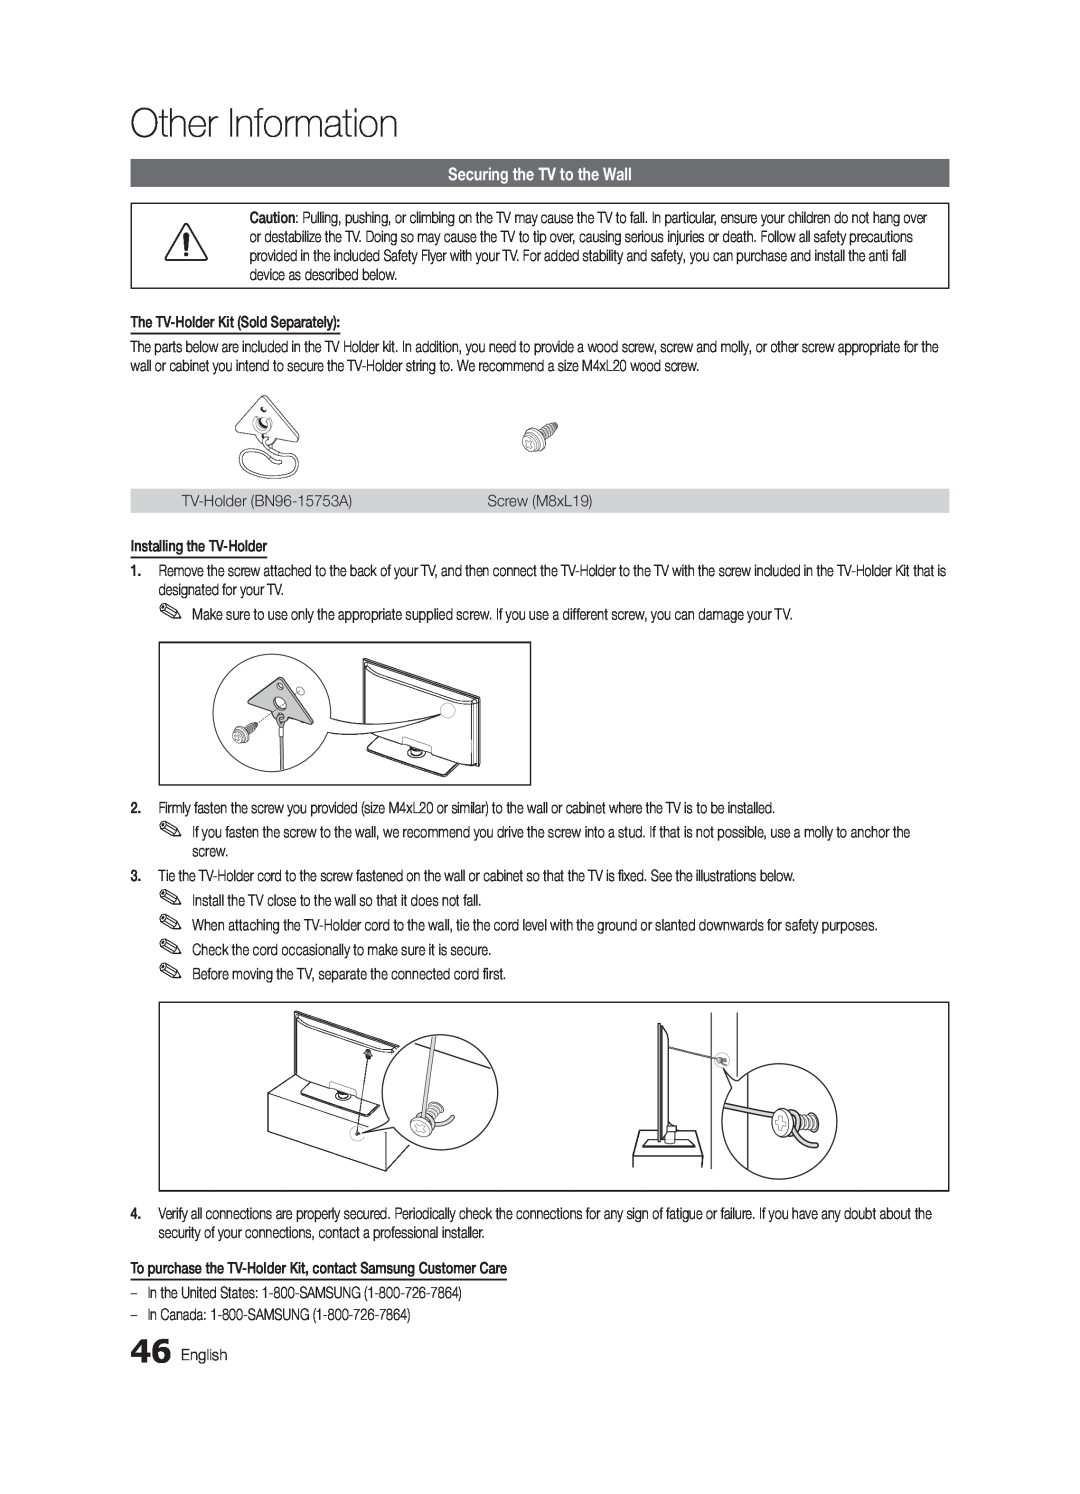 Samsung BN68-03165B-01, UC6300-ZC user manual Securing the TV to the Wall, Other Information 